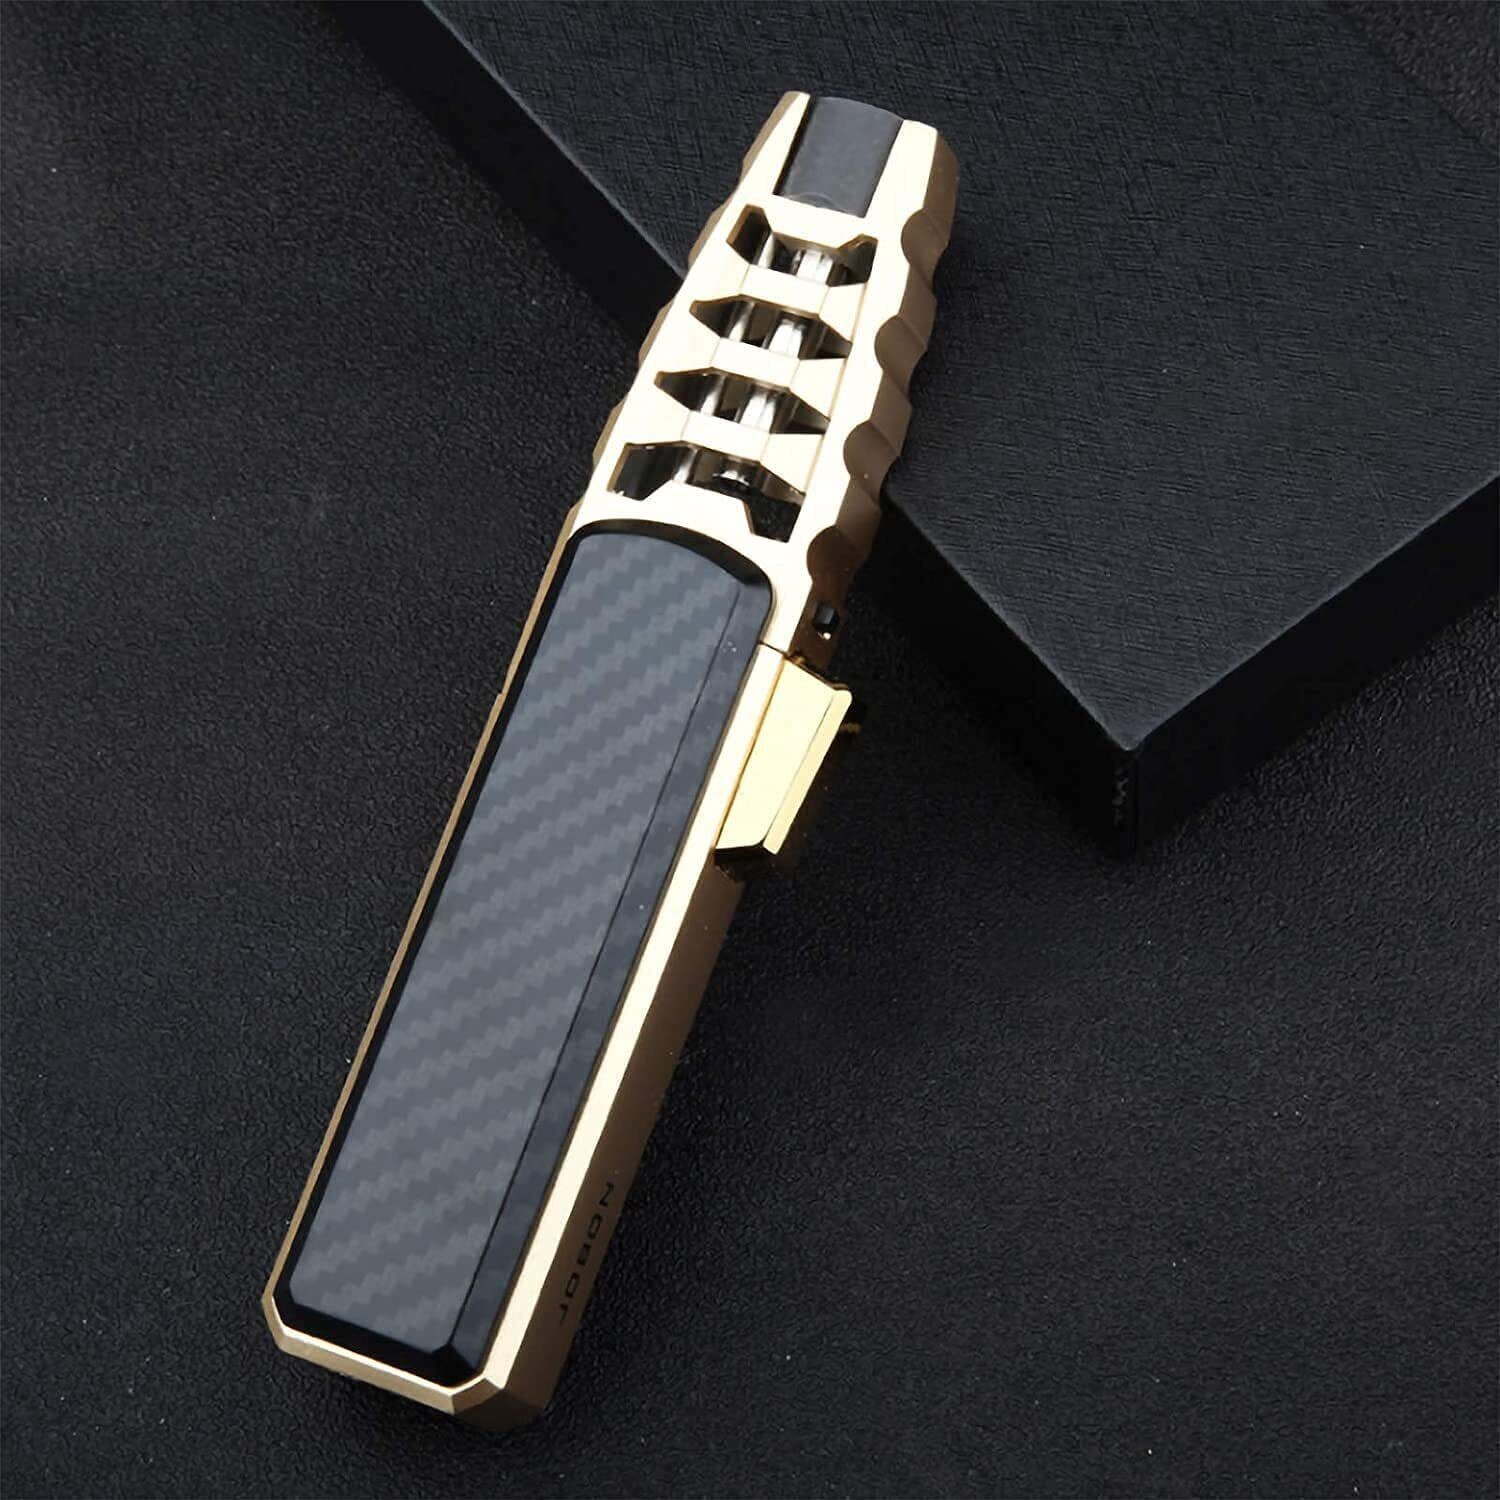 Solar Beam Torch the Hottest Torch on Earth Turbine Torcher Torch Lighter Jet